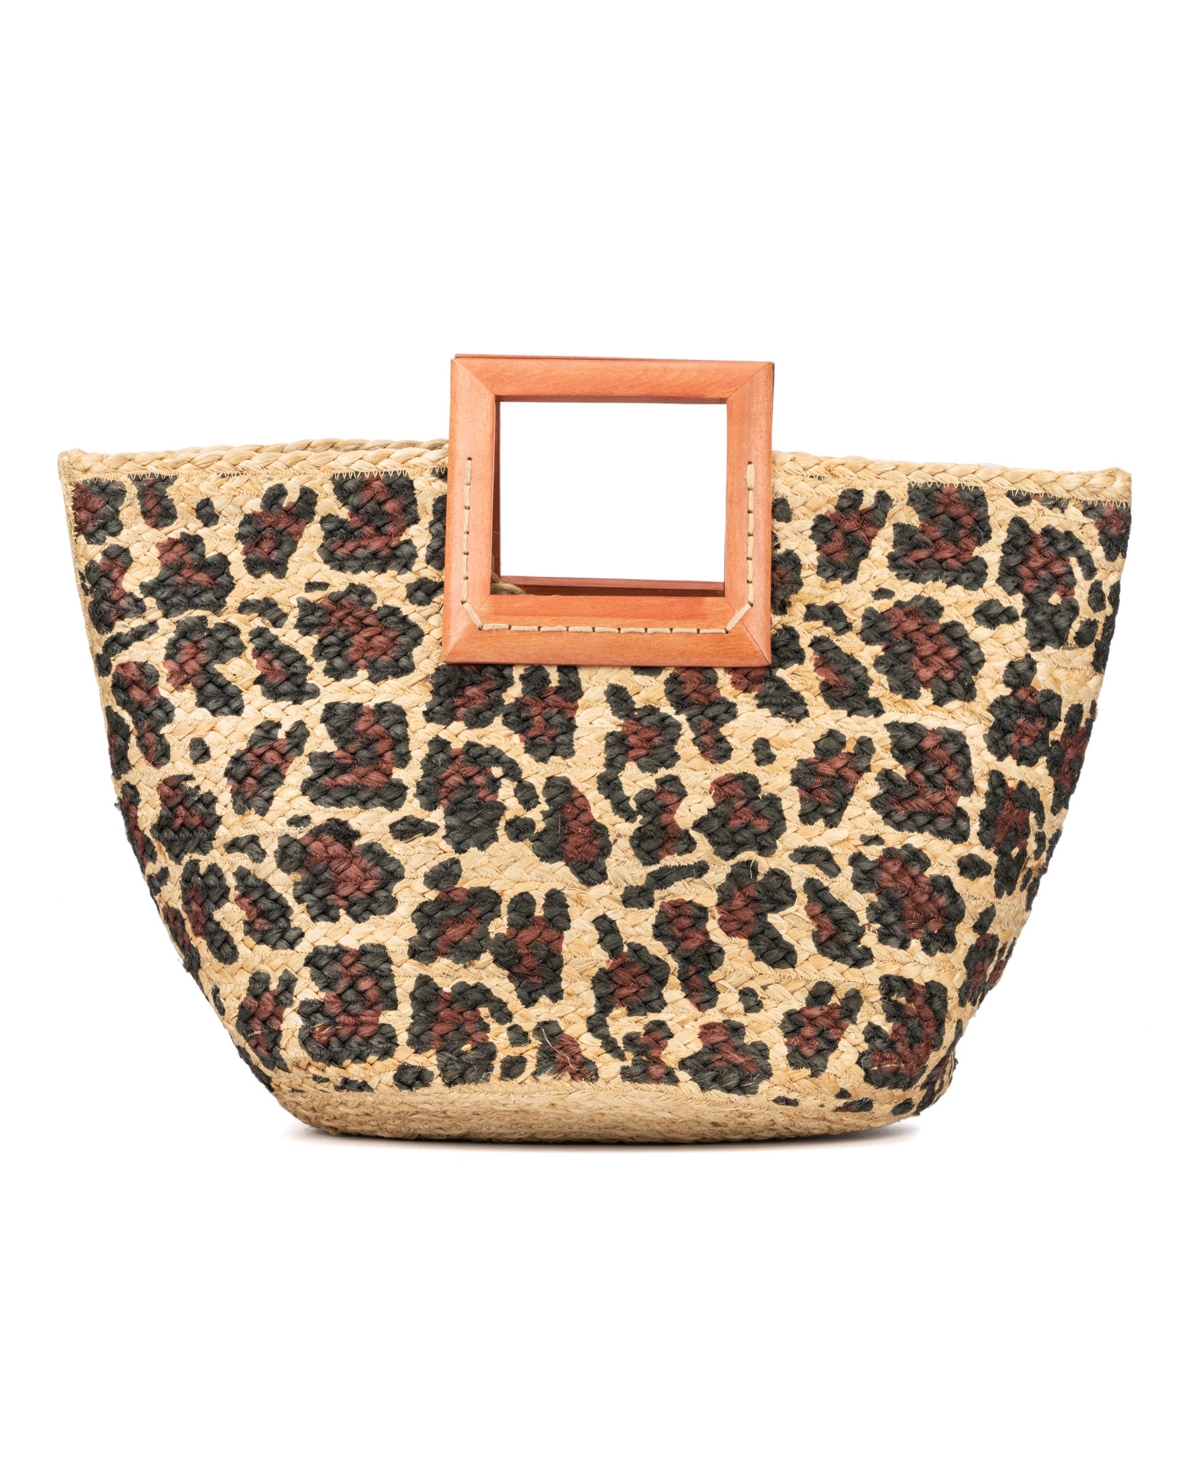 Olivia Miller Women's Judith Extra-large Tote In Leopard